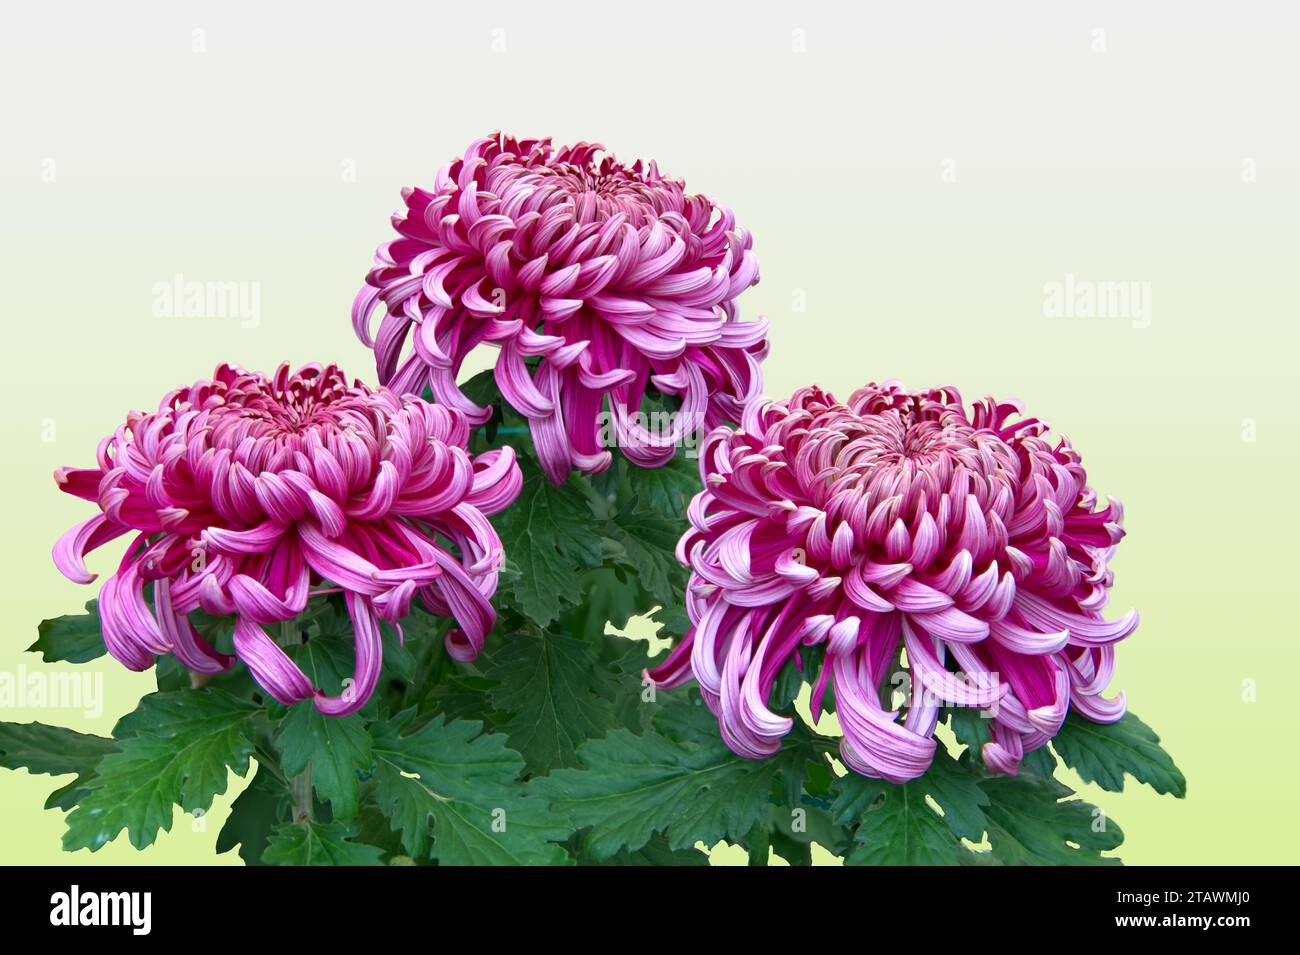 Three chrysanths in purple color with green leaves isolated in png transparency, flora, floral Stock Photo